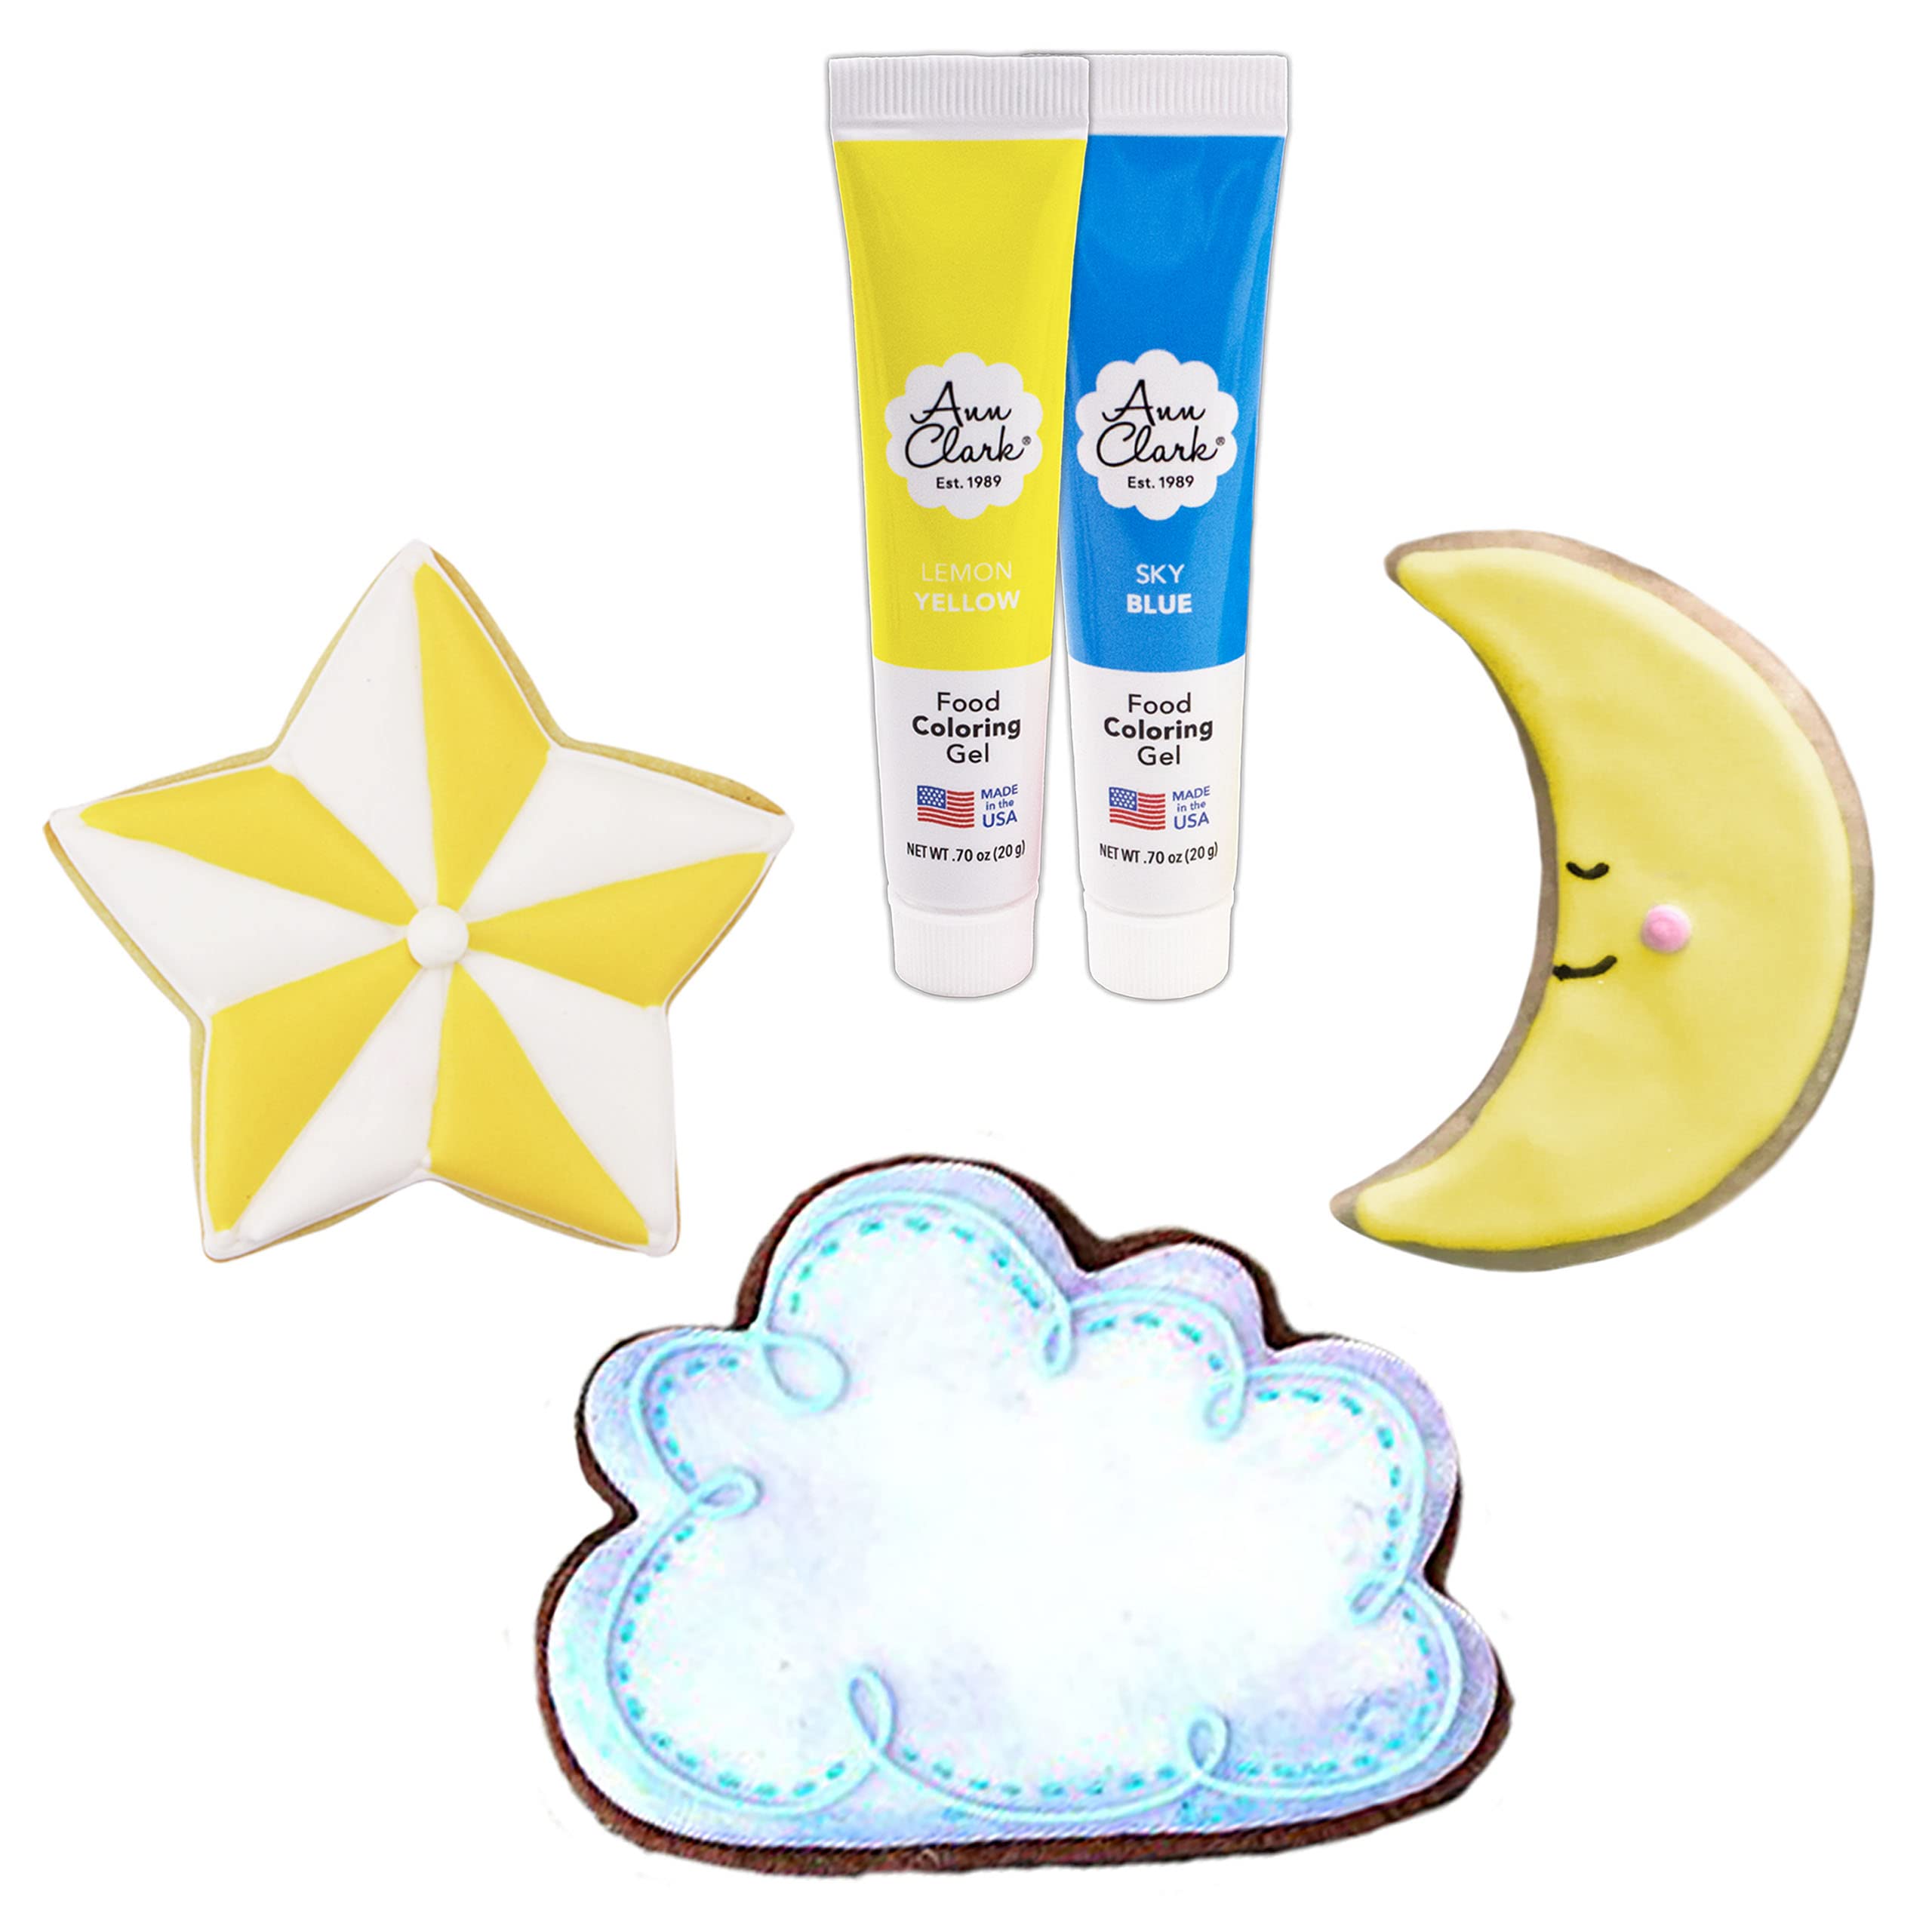 Celestial Cookie Decorating 5-Pc. Set Made in USA by Ann Clark, Star, Cloud, Crescent Moon, Yellow & Sky Blue Food Coloring Gel